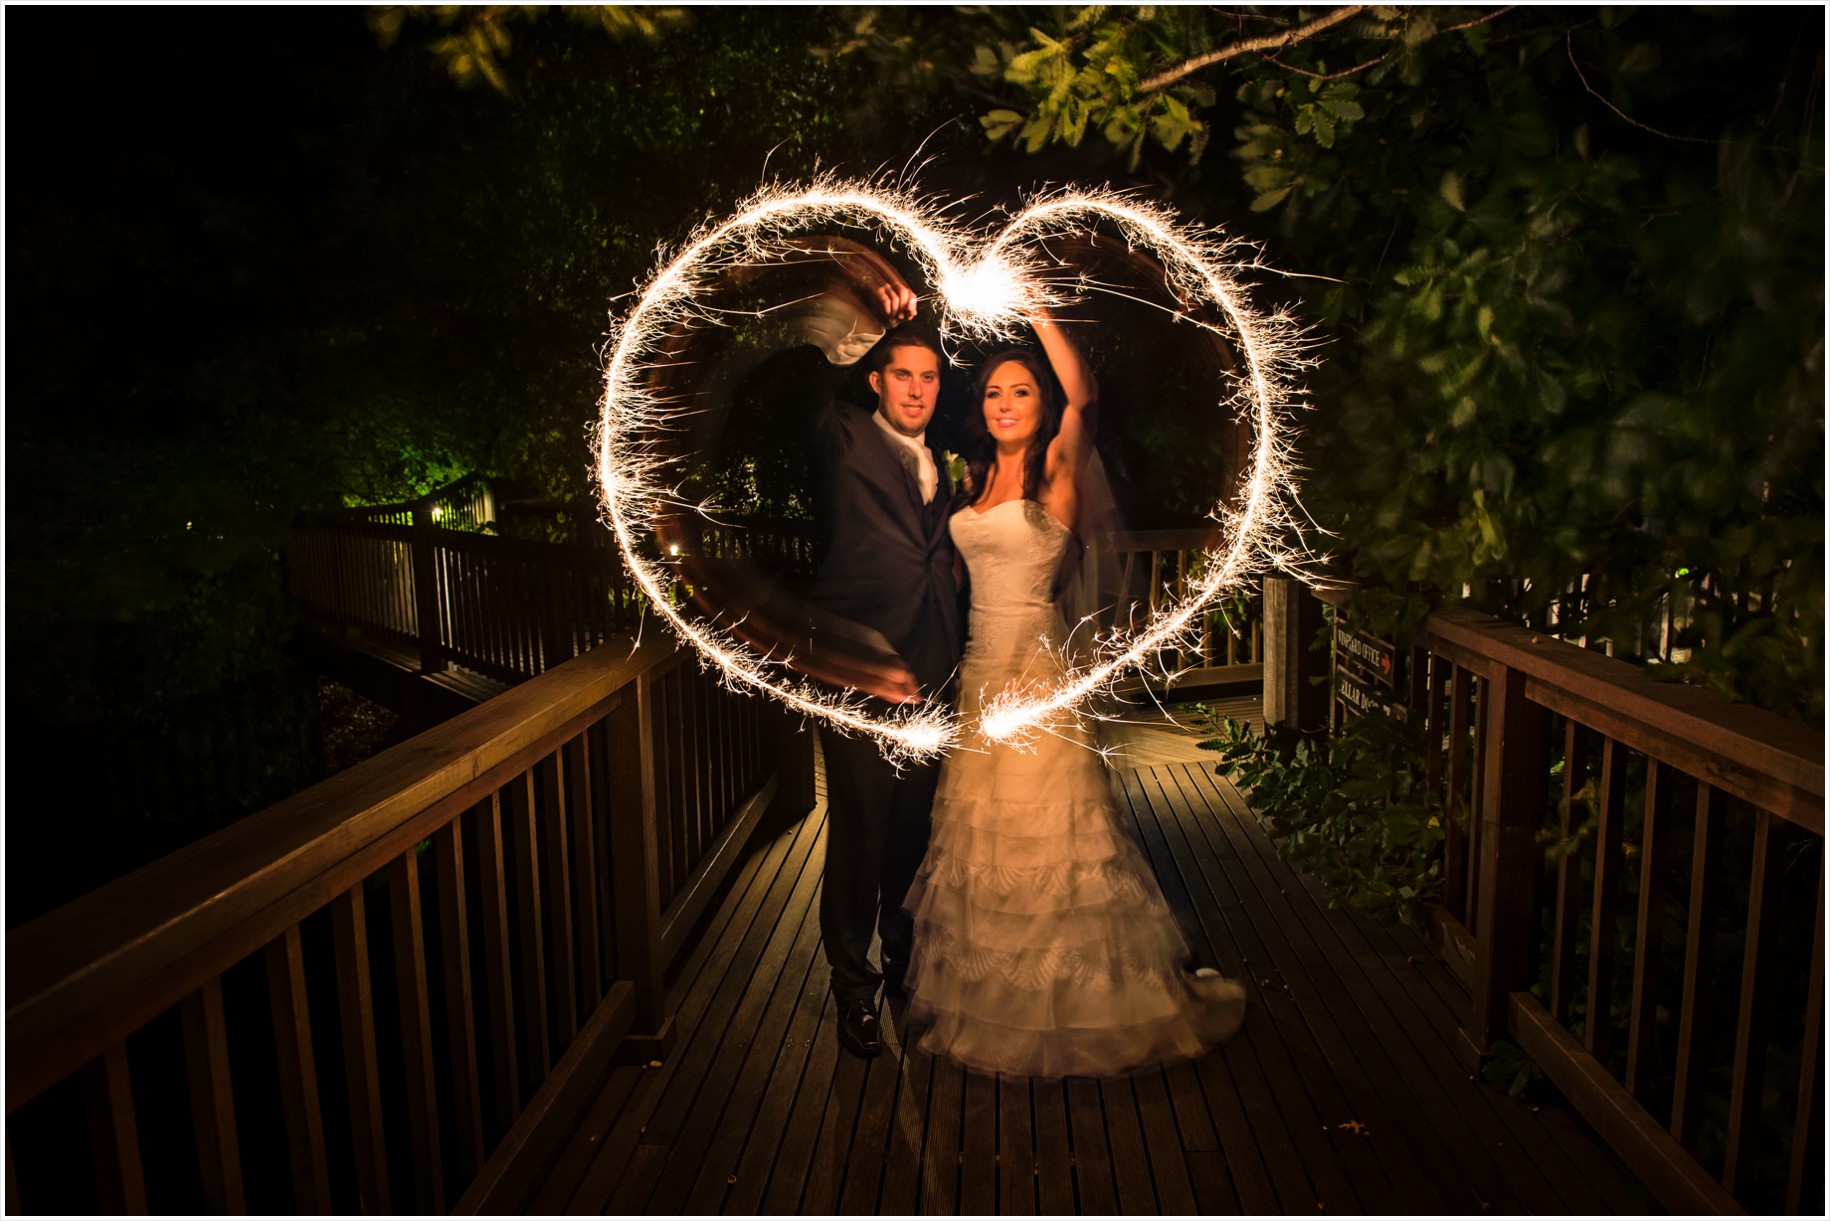 Ways To Find The Best Wedding Photographer Out There